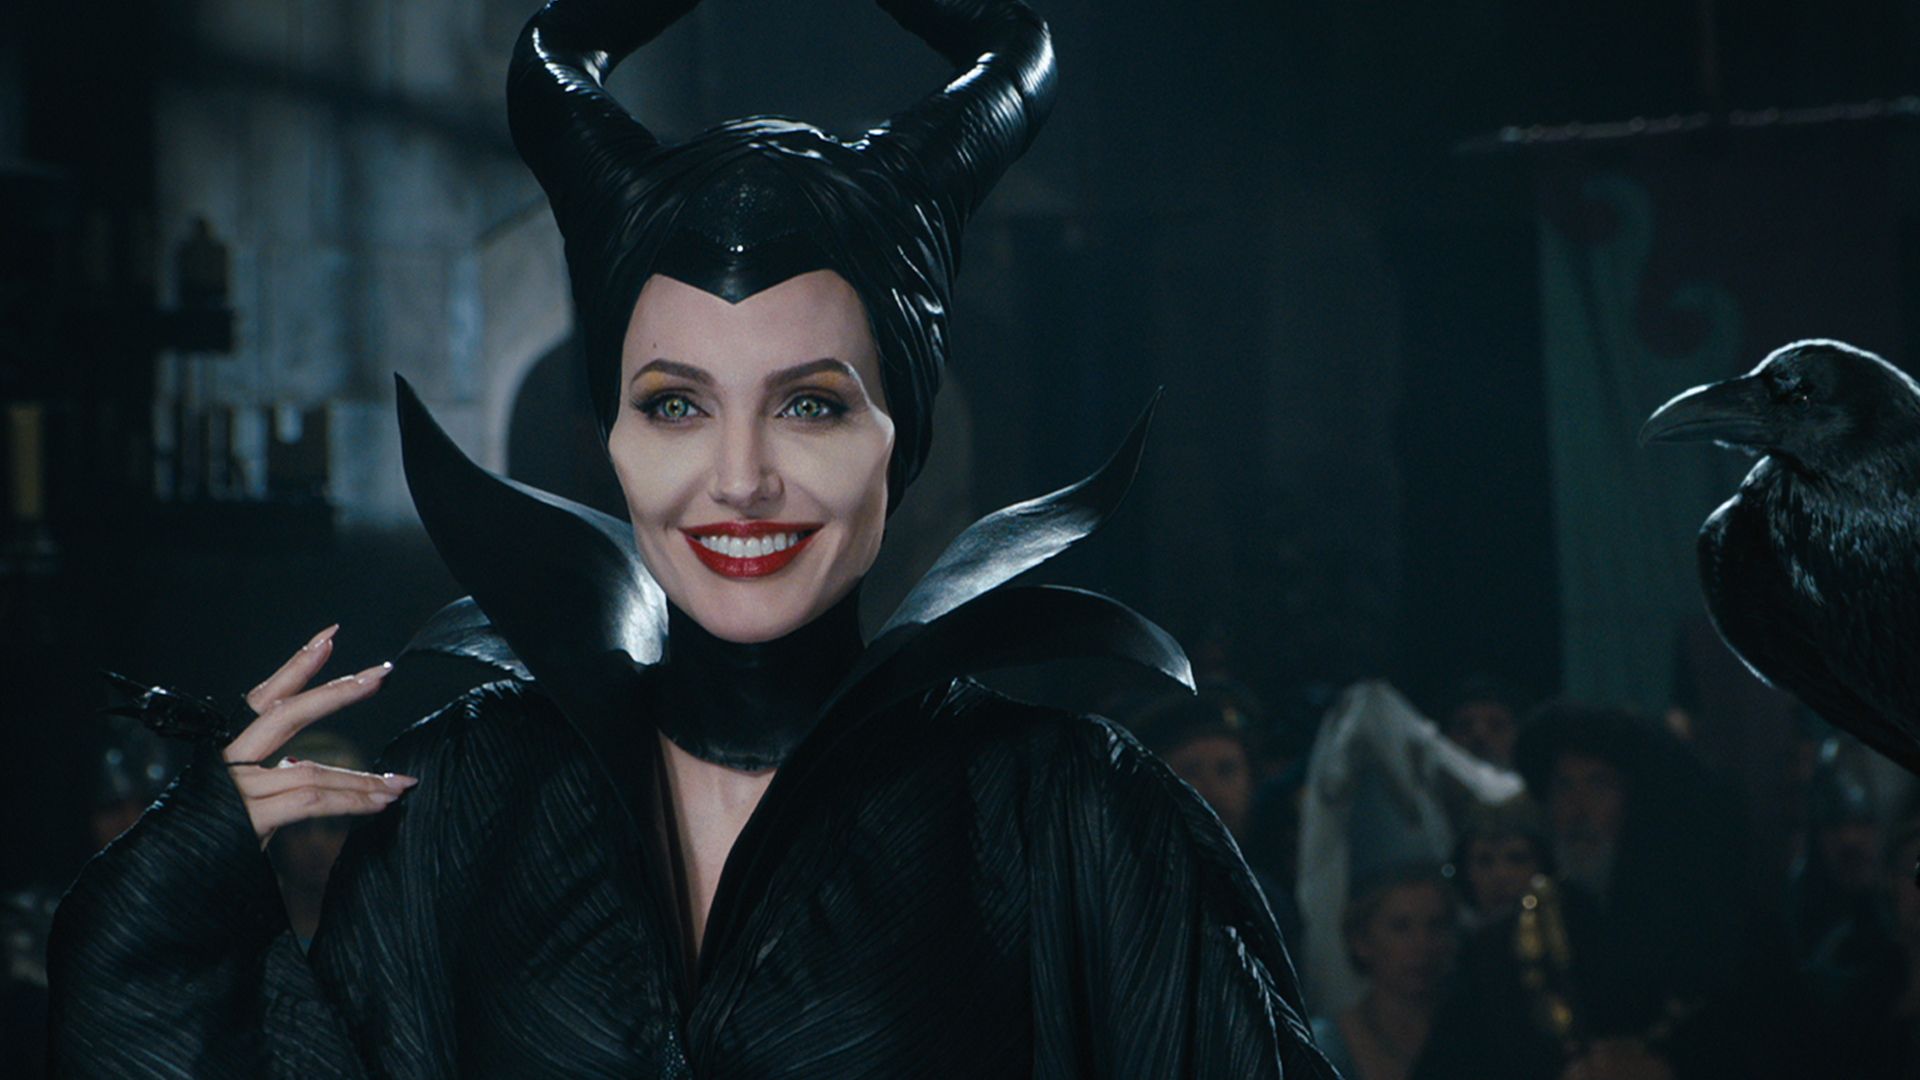 A scene from Maleficent